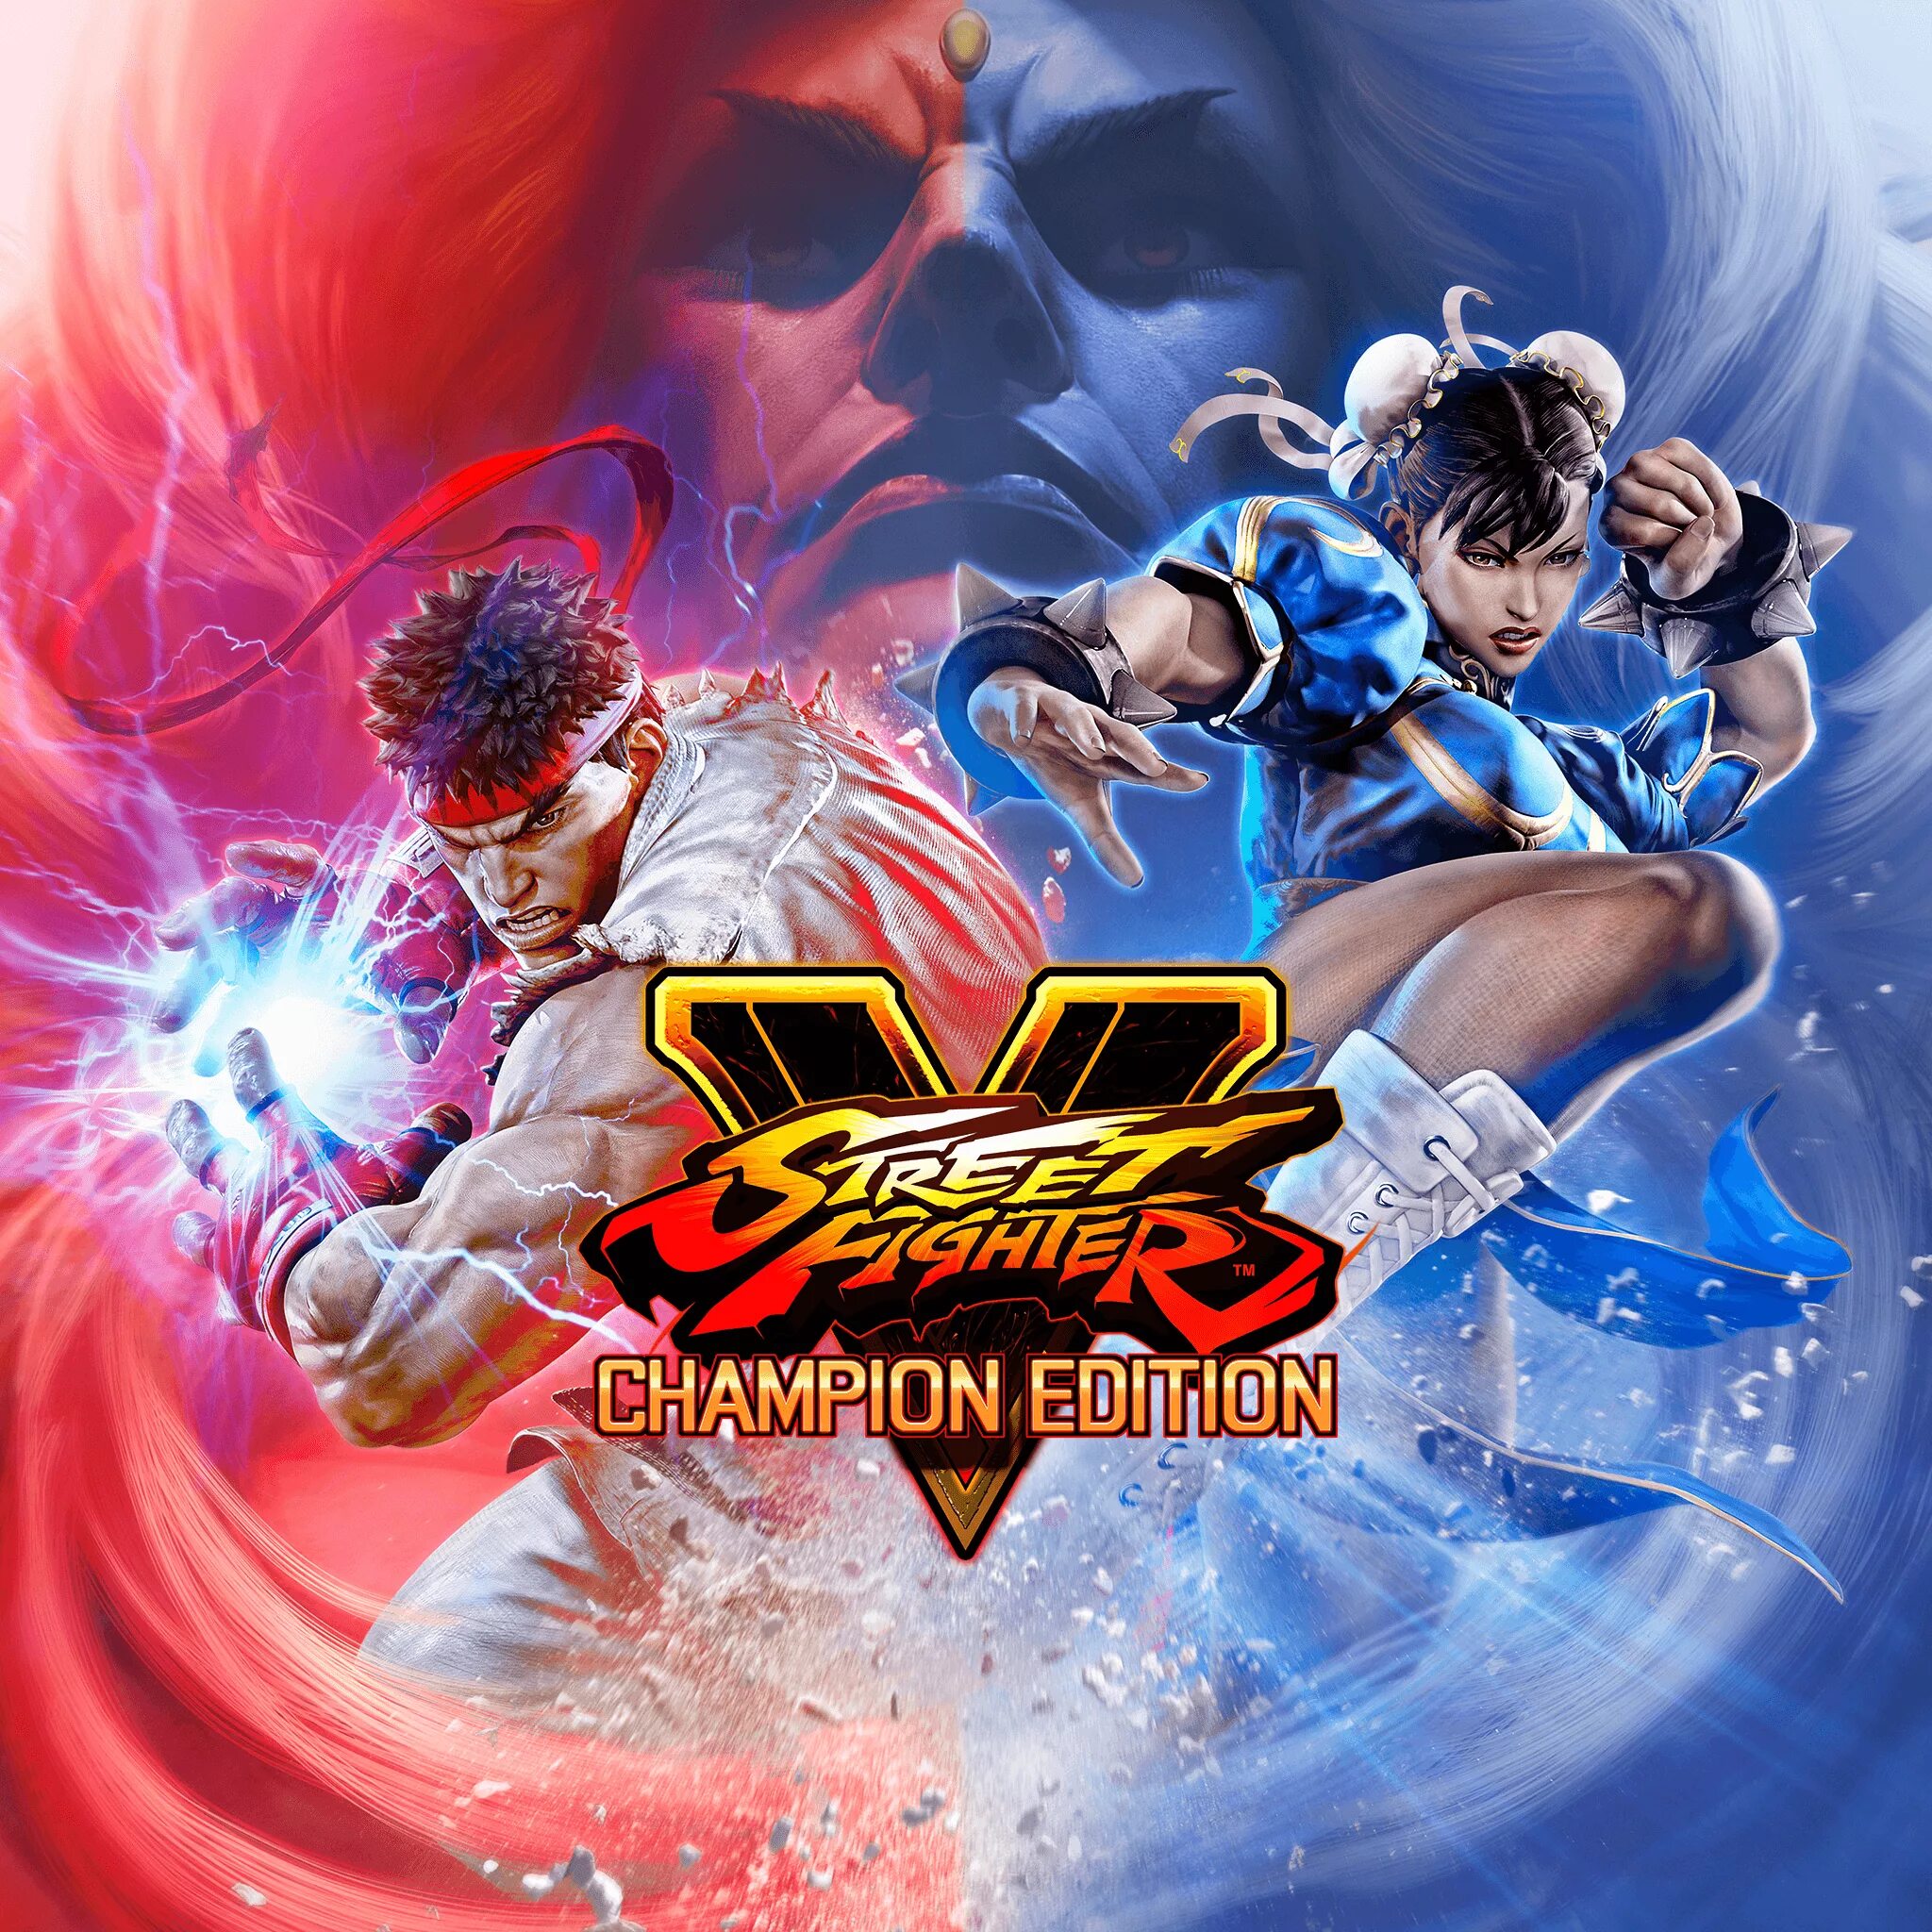 Fight ps4. Street Fighter v: Champion Edition ps4. Street Fighter 5 Champion Edition. Street Fighter ps5. Street Fighter 4 Champion Edition.